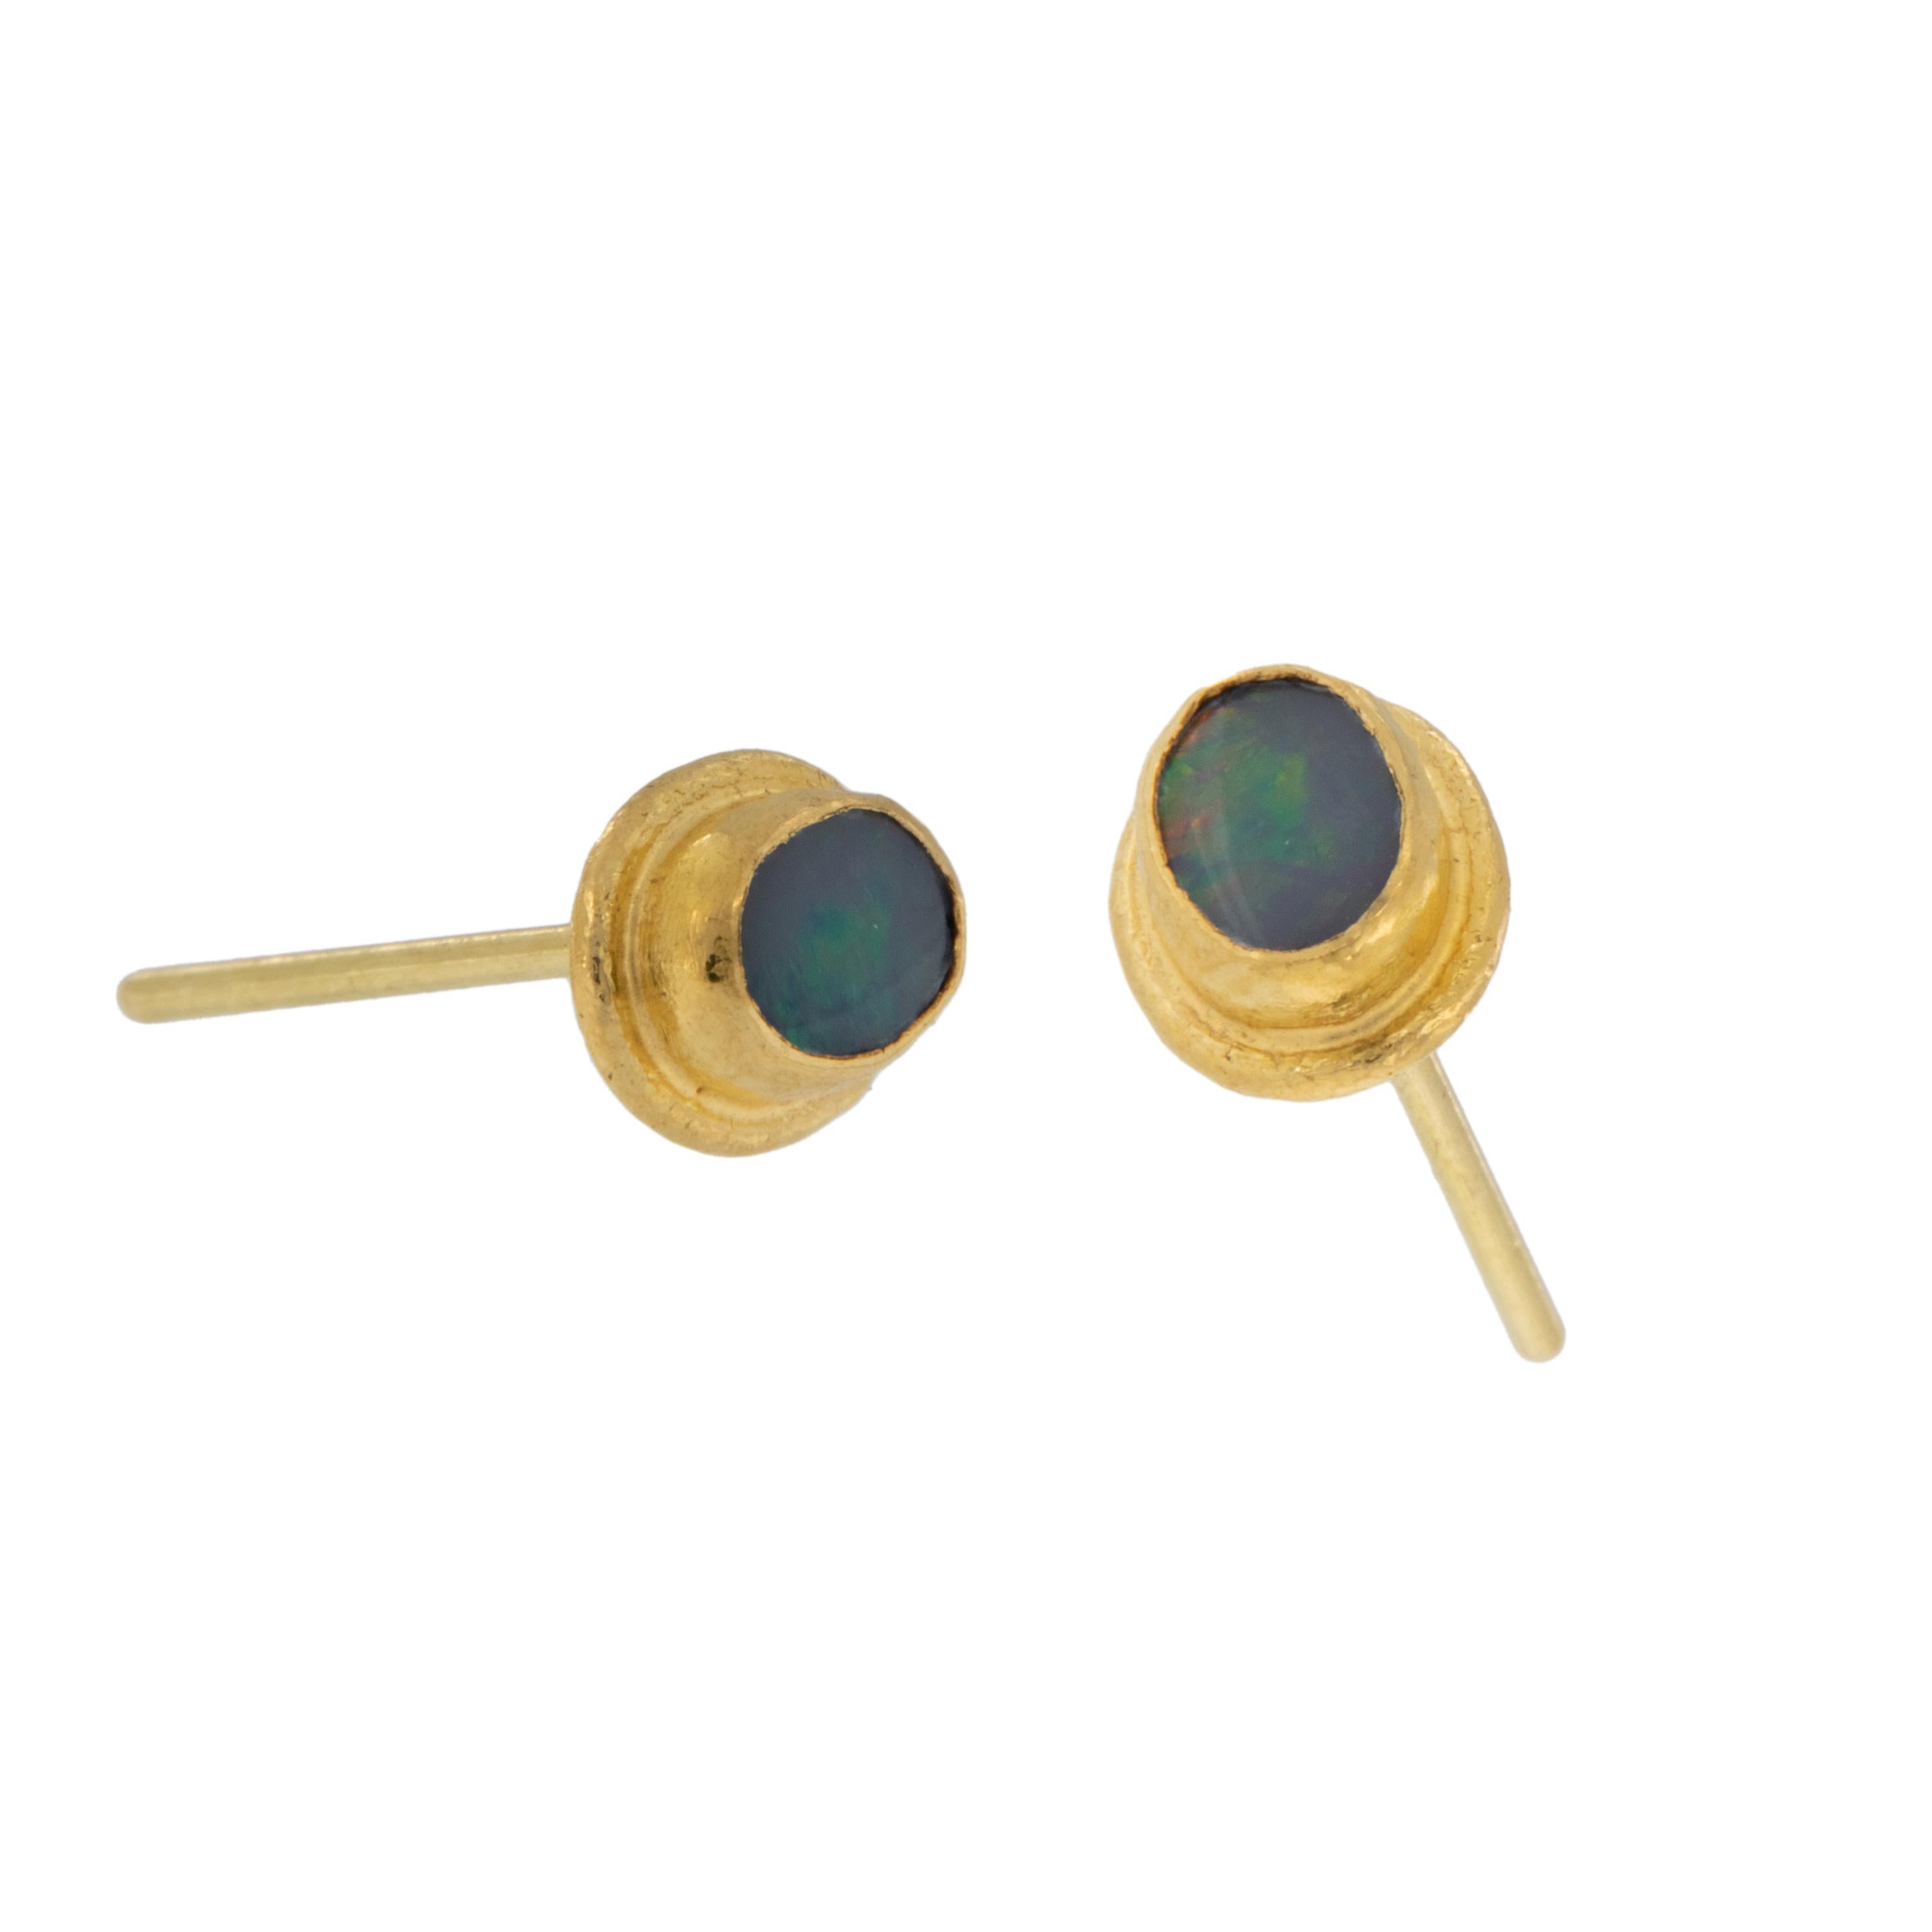 How adorable are these colorful opal earrings? Rarest of all the golds, 24 karat gold has a distinct, rich color valued by investors worldwide, which is further enhanced by the boldly colored opals bezel set for a fun look. Pierced with 18 KYG